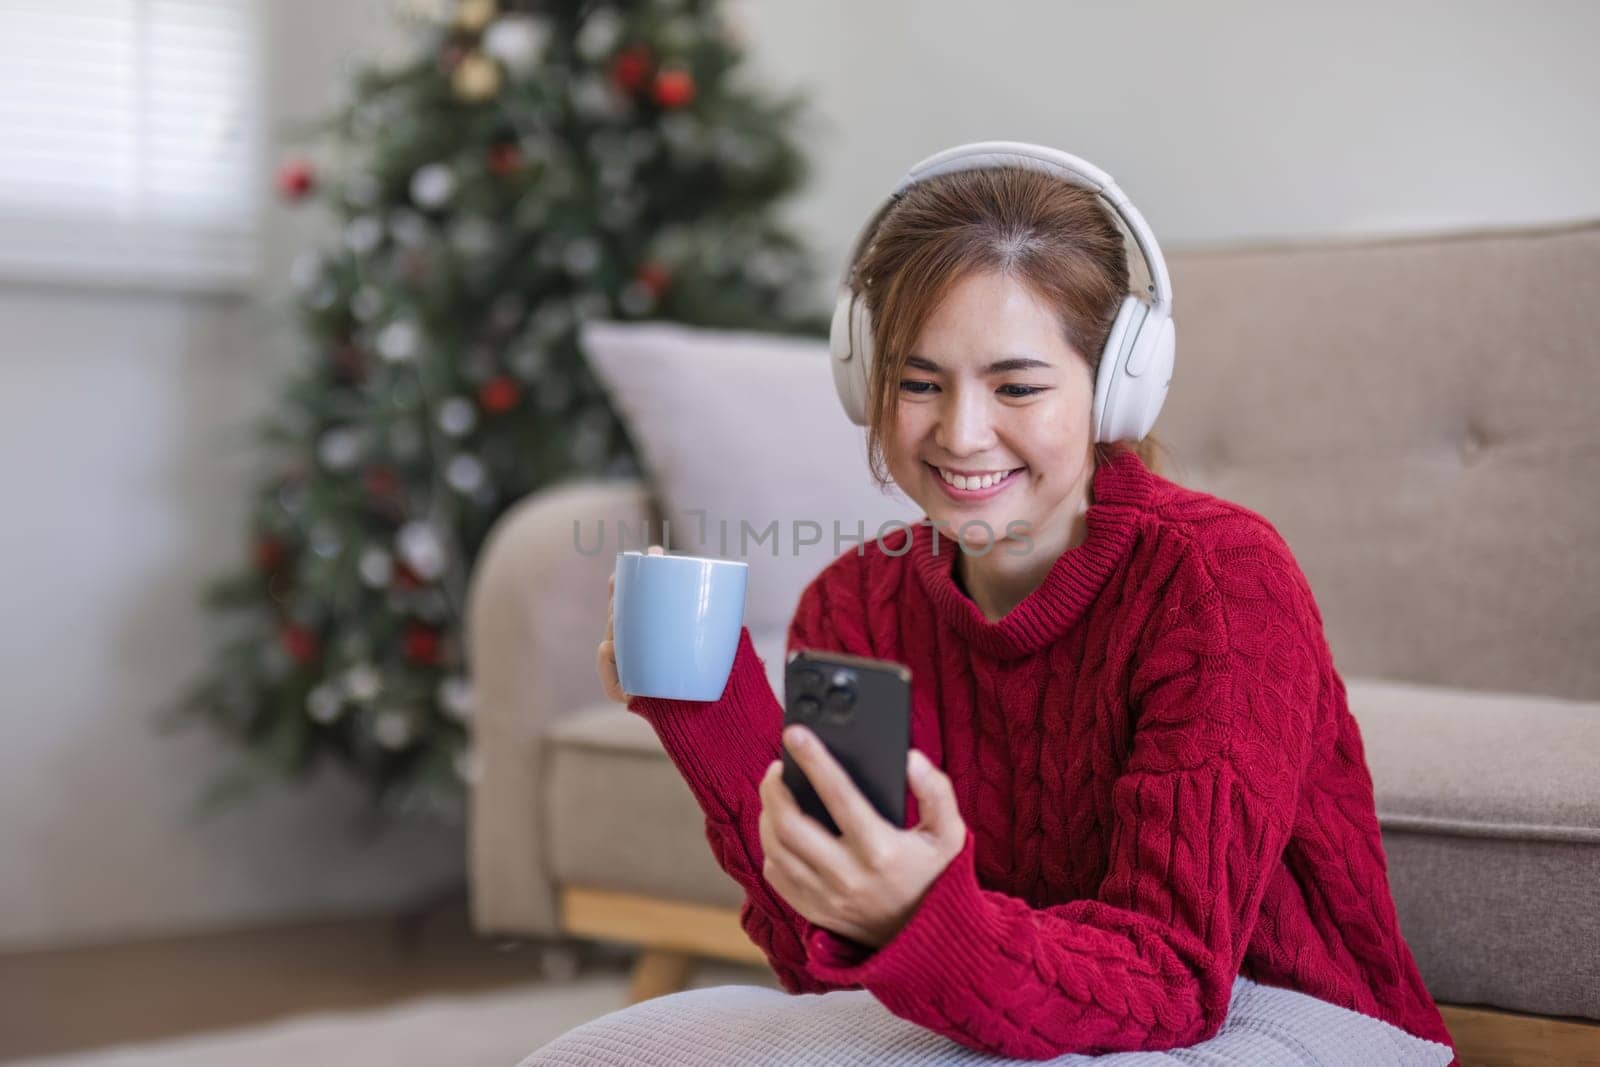 Asian woman sitting on sofa in living room using smartphone and listening to music on headphones..